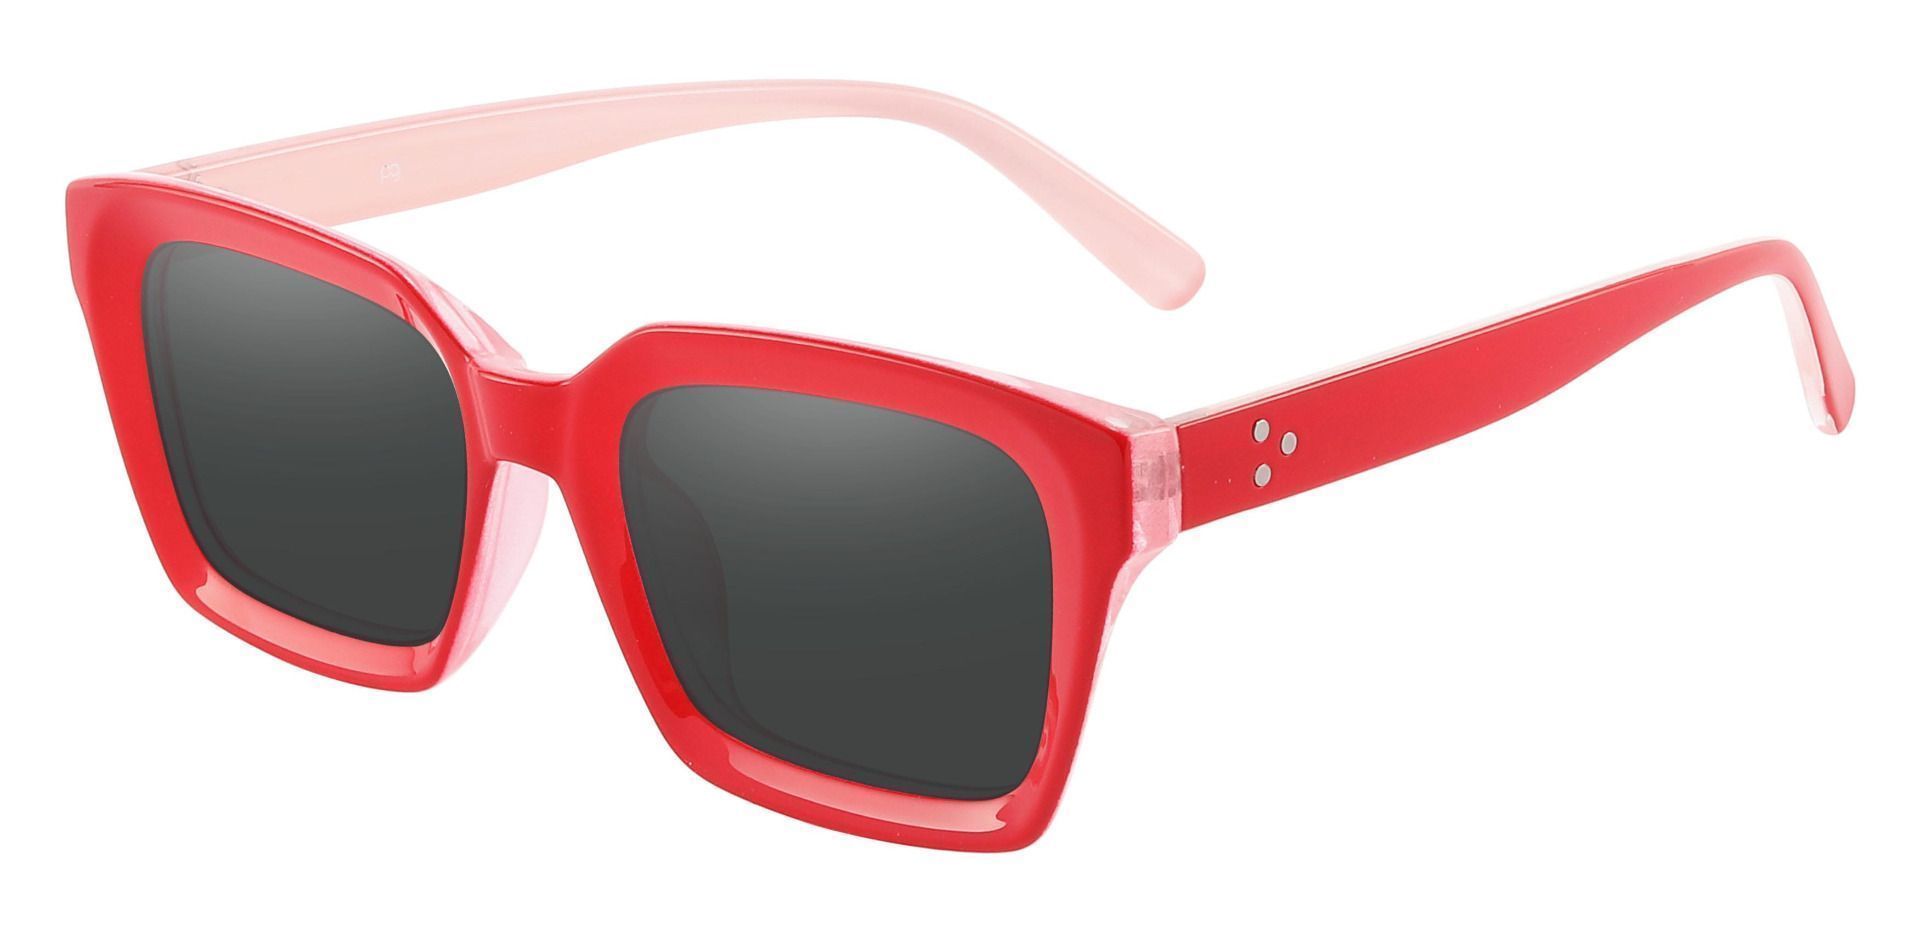 Unity Rectangle Reading Sunglasses - Red Frame With Gray Lenses